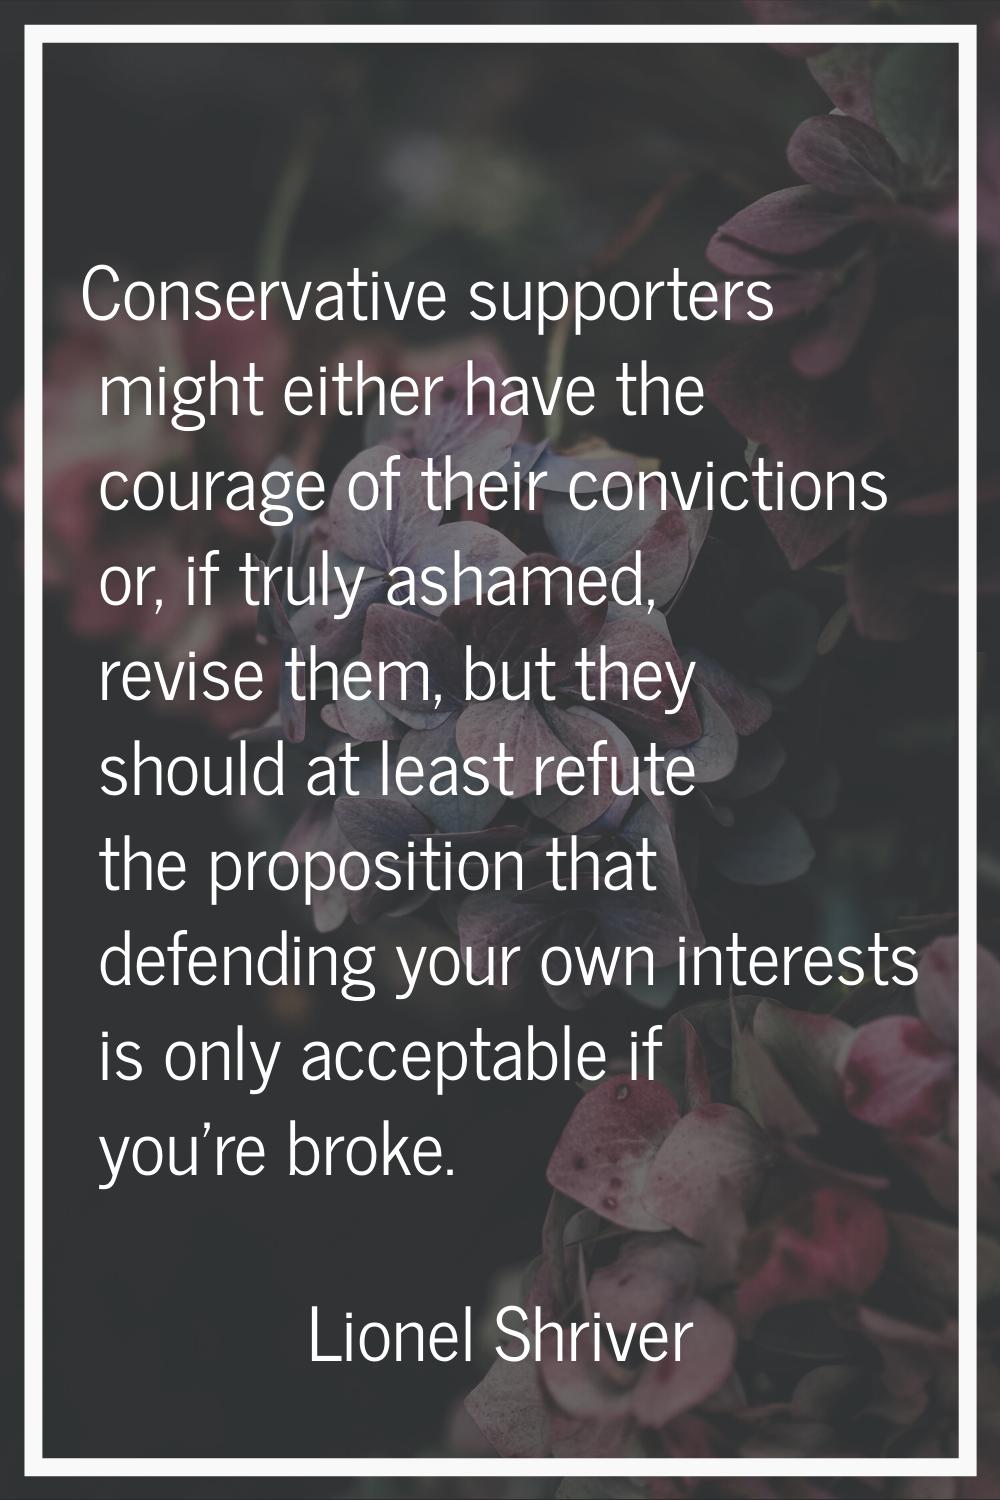 Conservative supporters might either have the courage of their convictions or, if truly ashamed, re